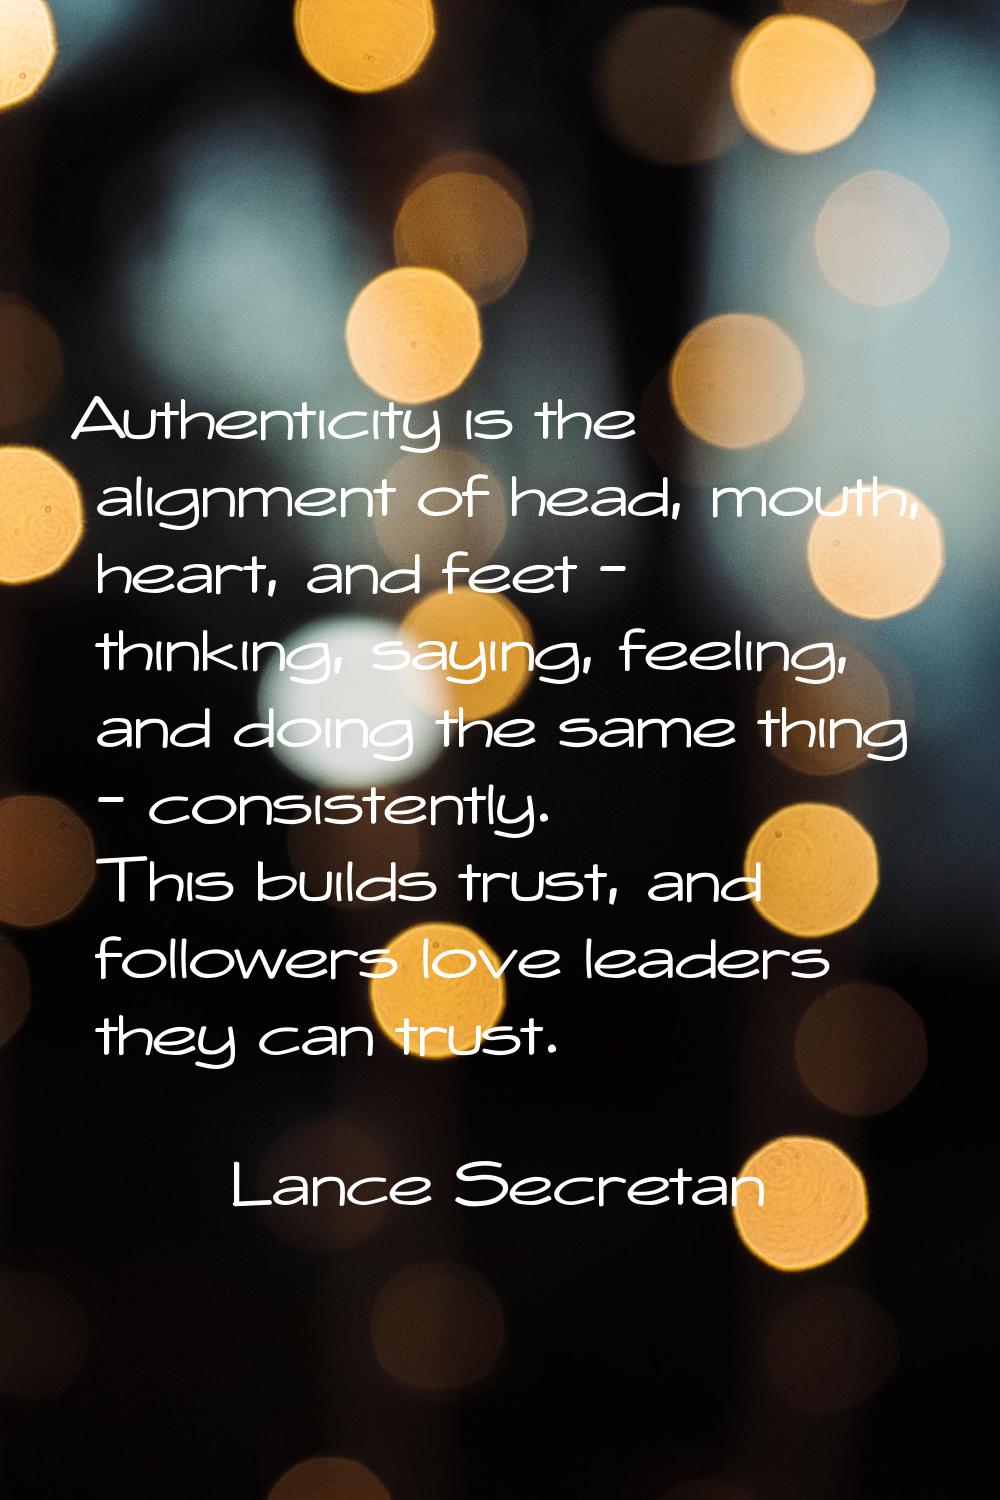 Authenticity is the alignment of head, mouth, heart, and feet - thinking, saying, feeling, and doin